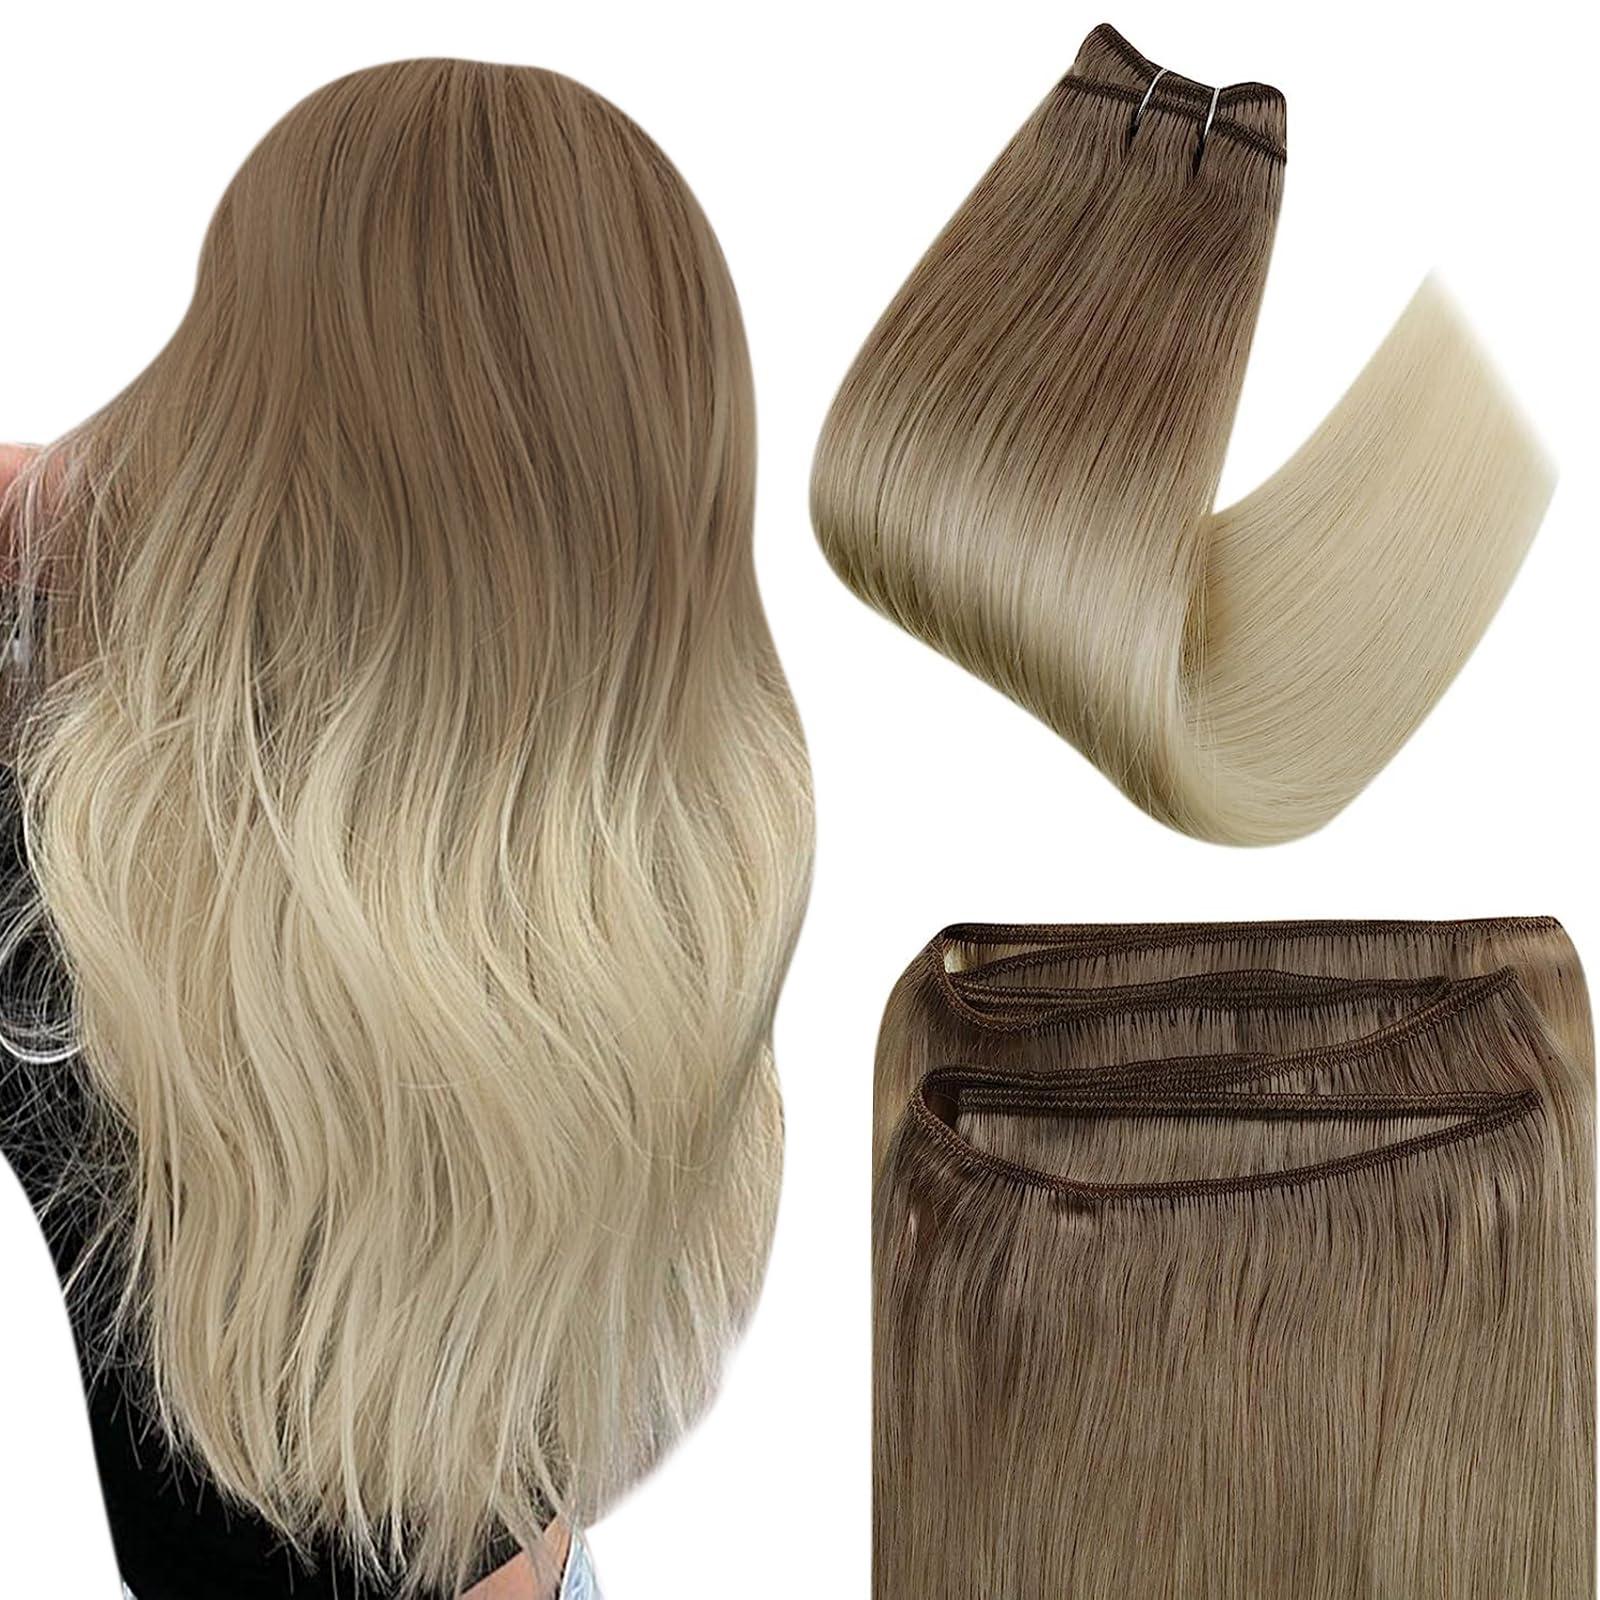 Easyouth Secret Wire Hair Extensions Human Hair Highlight Blonde Hair Wire Extensions Ash Blonde Fish Wire Hair Natural Invisible 14 Inch 70g